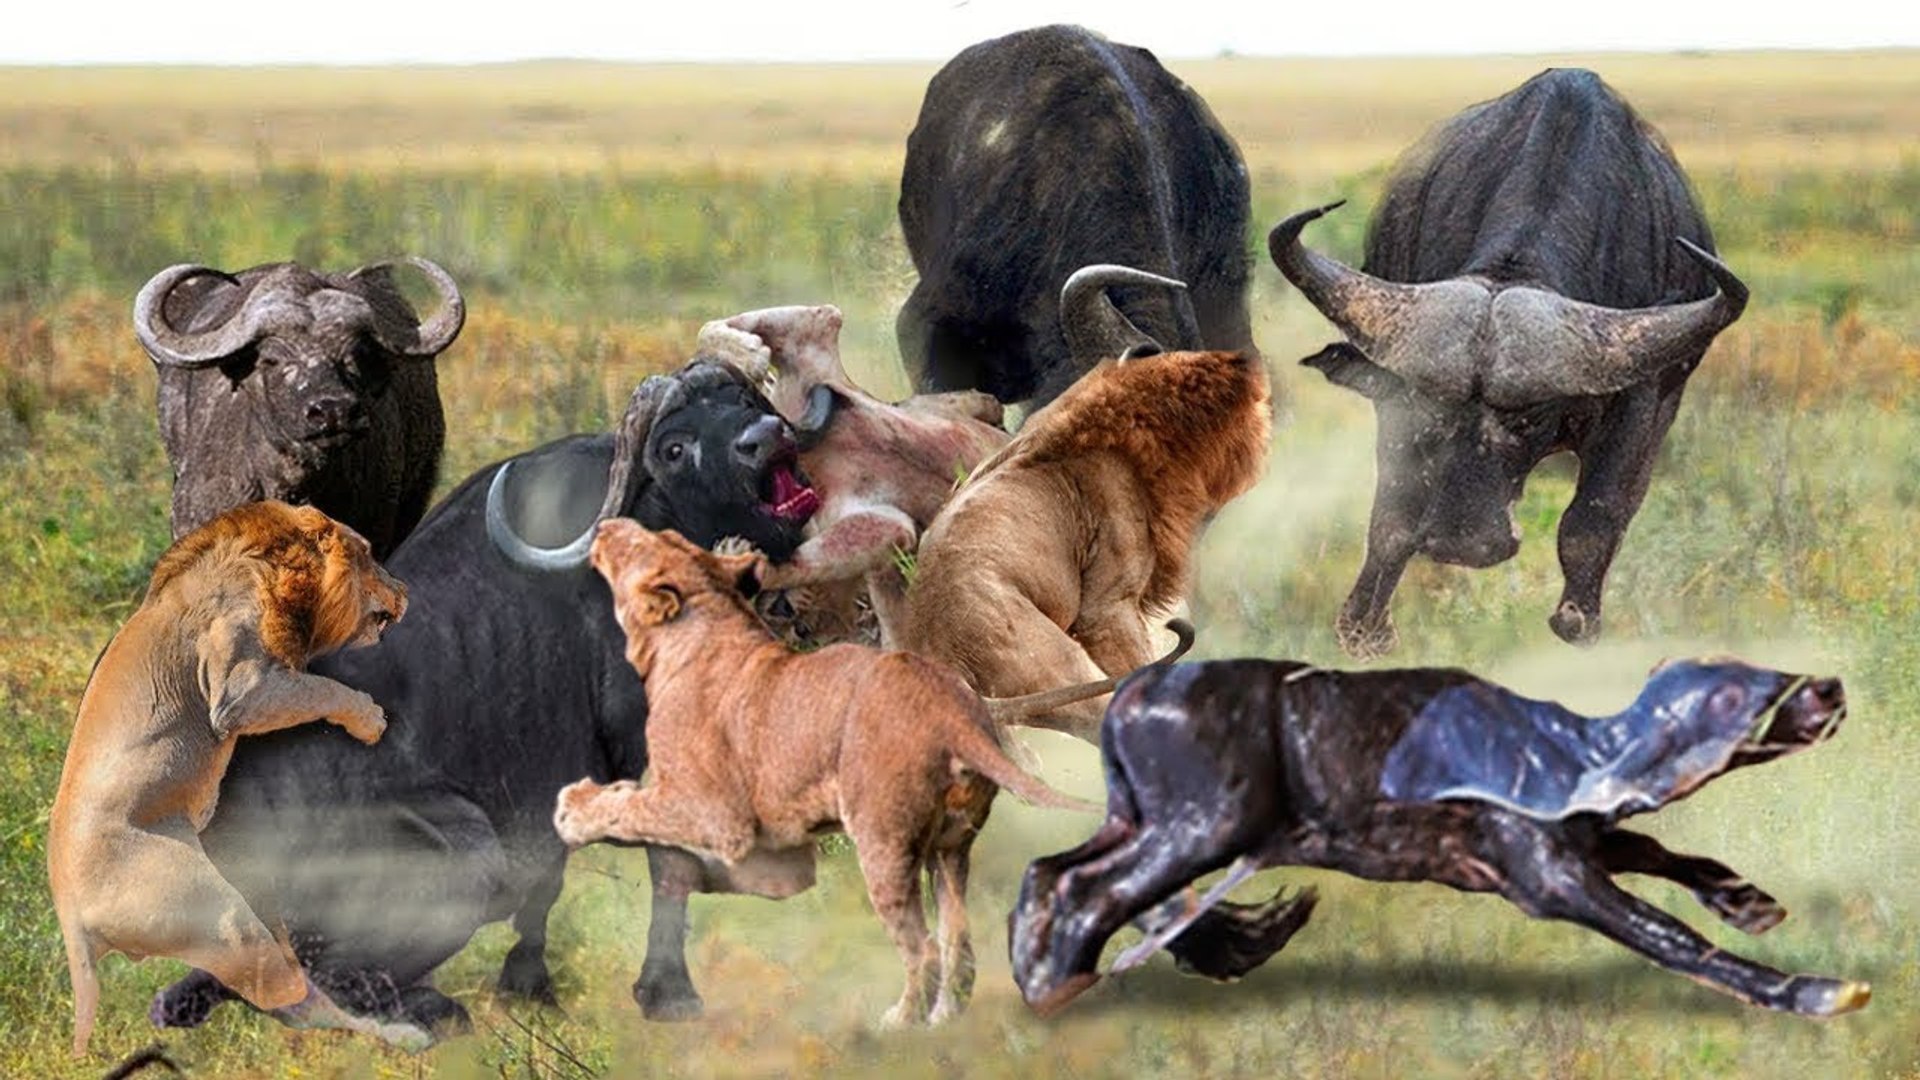 Herd Buffalo Buffalo Giving Birth And Newborn Escape The Lion Too Terrible video Dailymotion